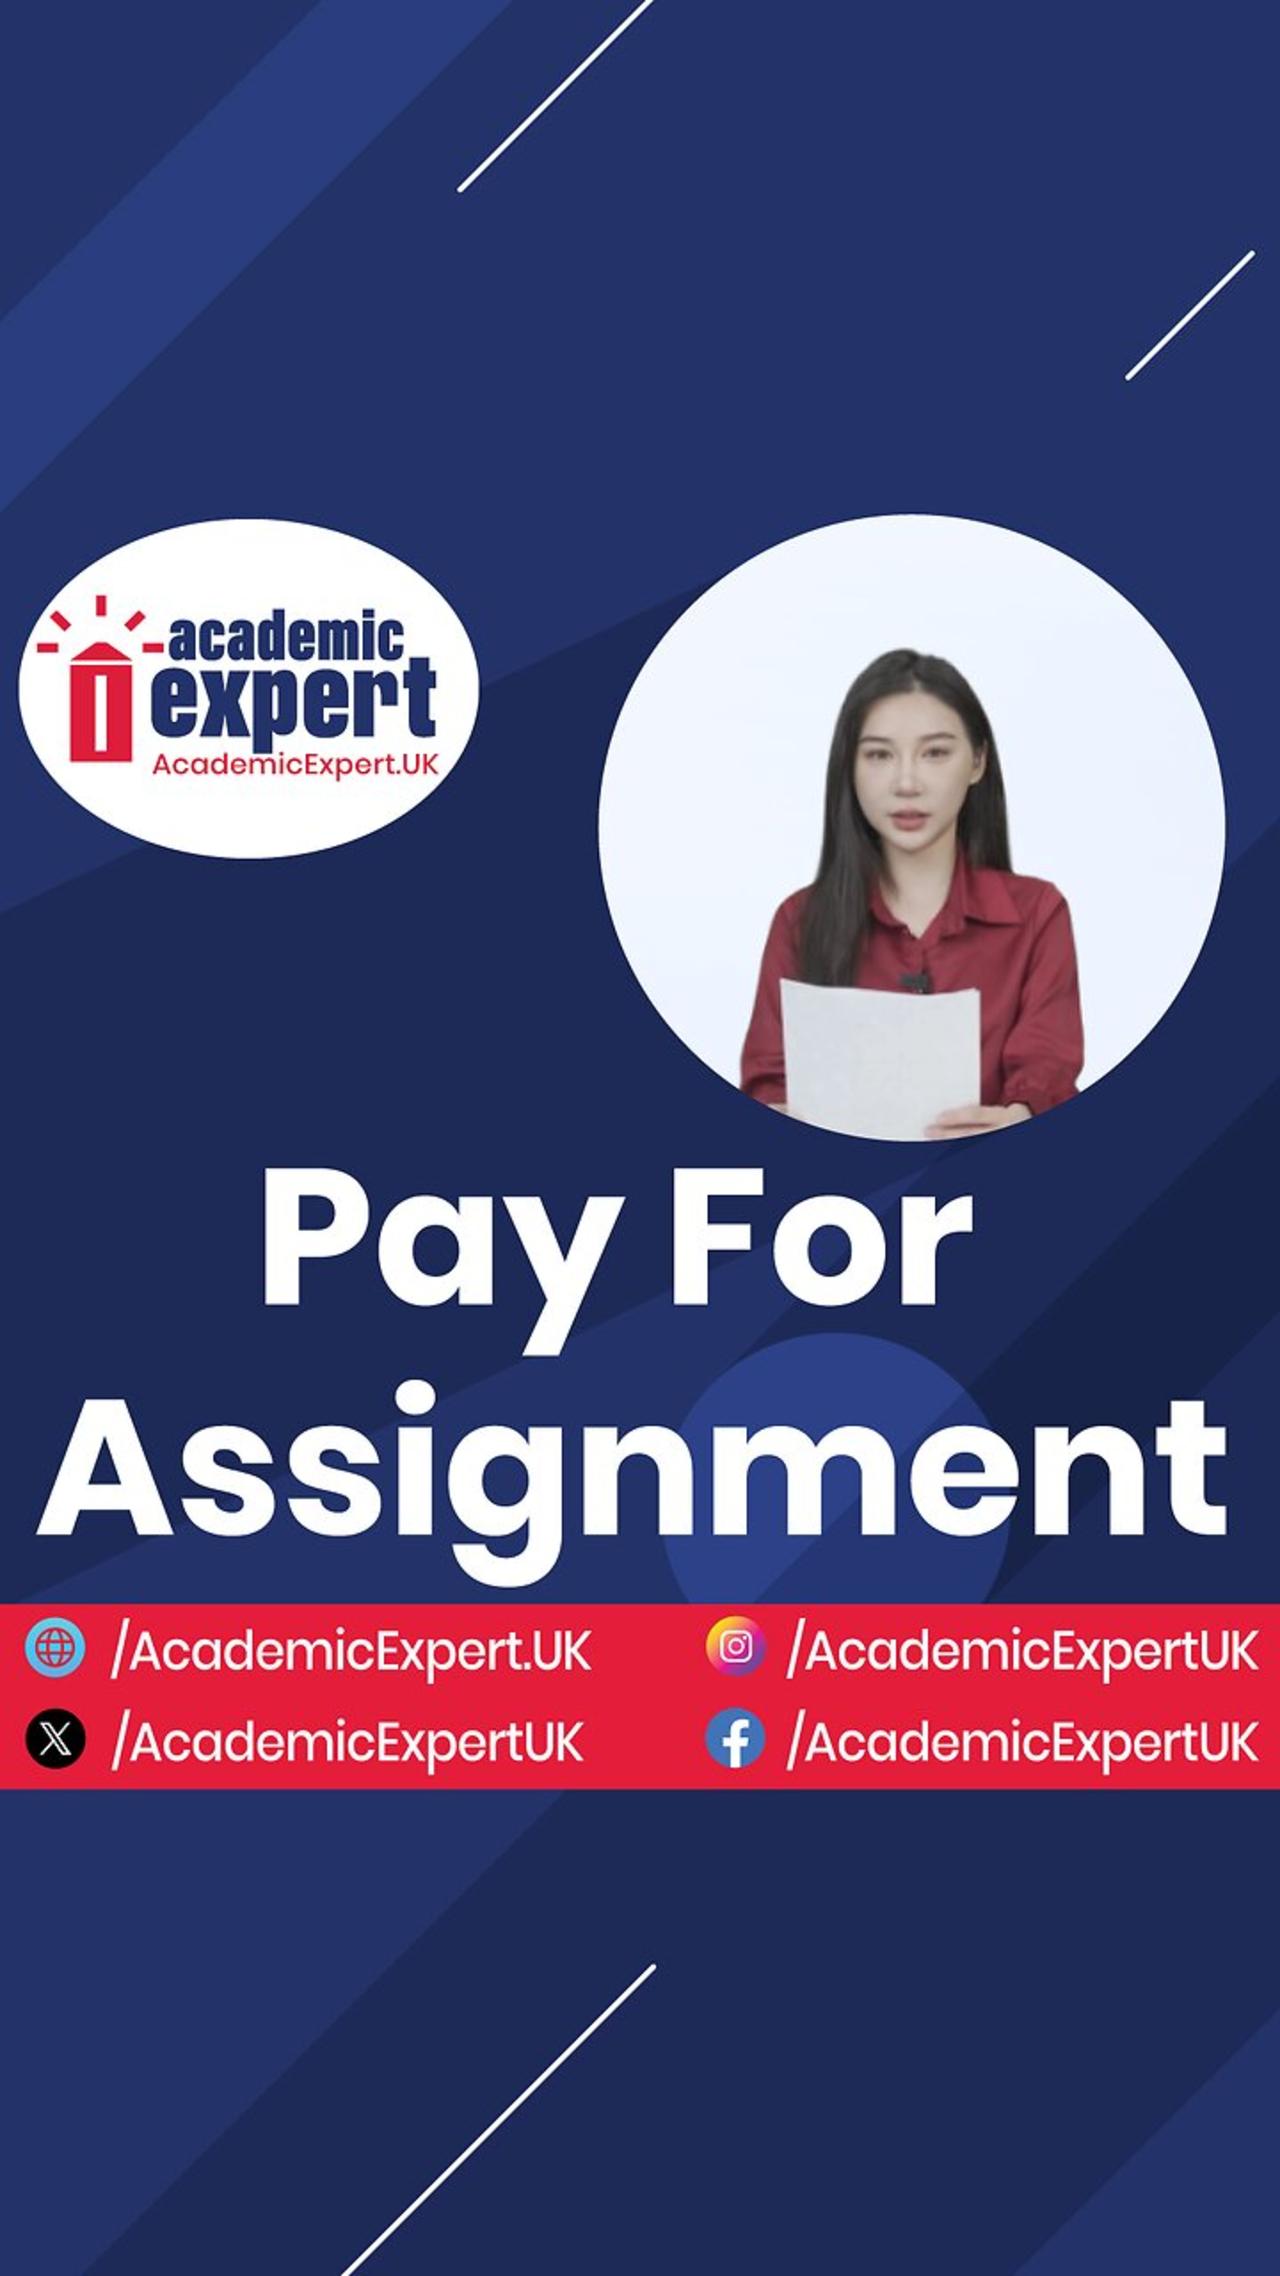 Pay For Assignment | academicexpert.uk